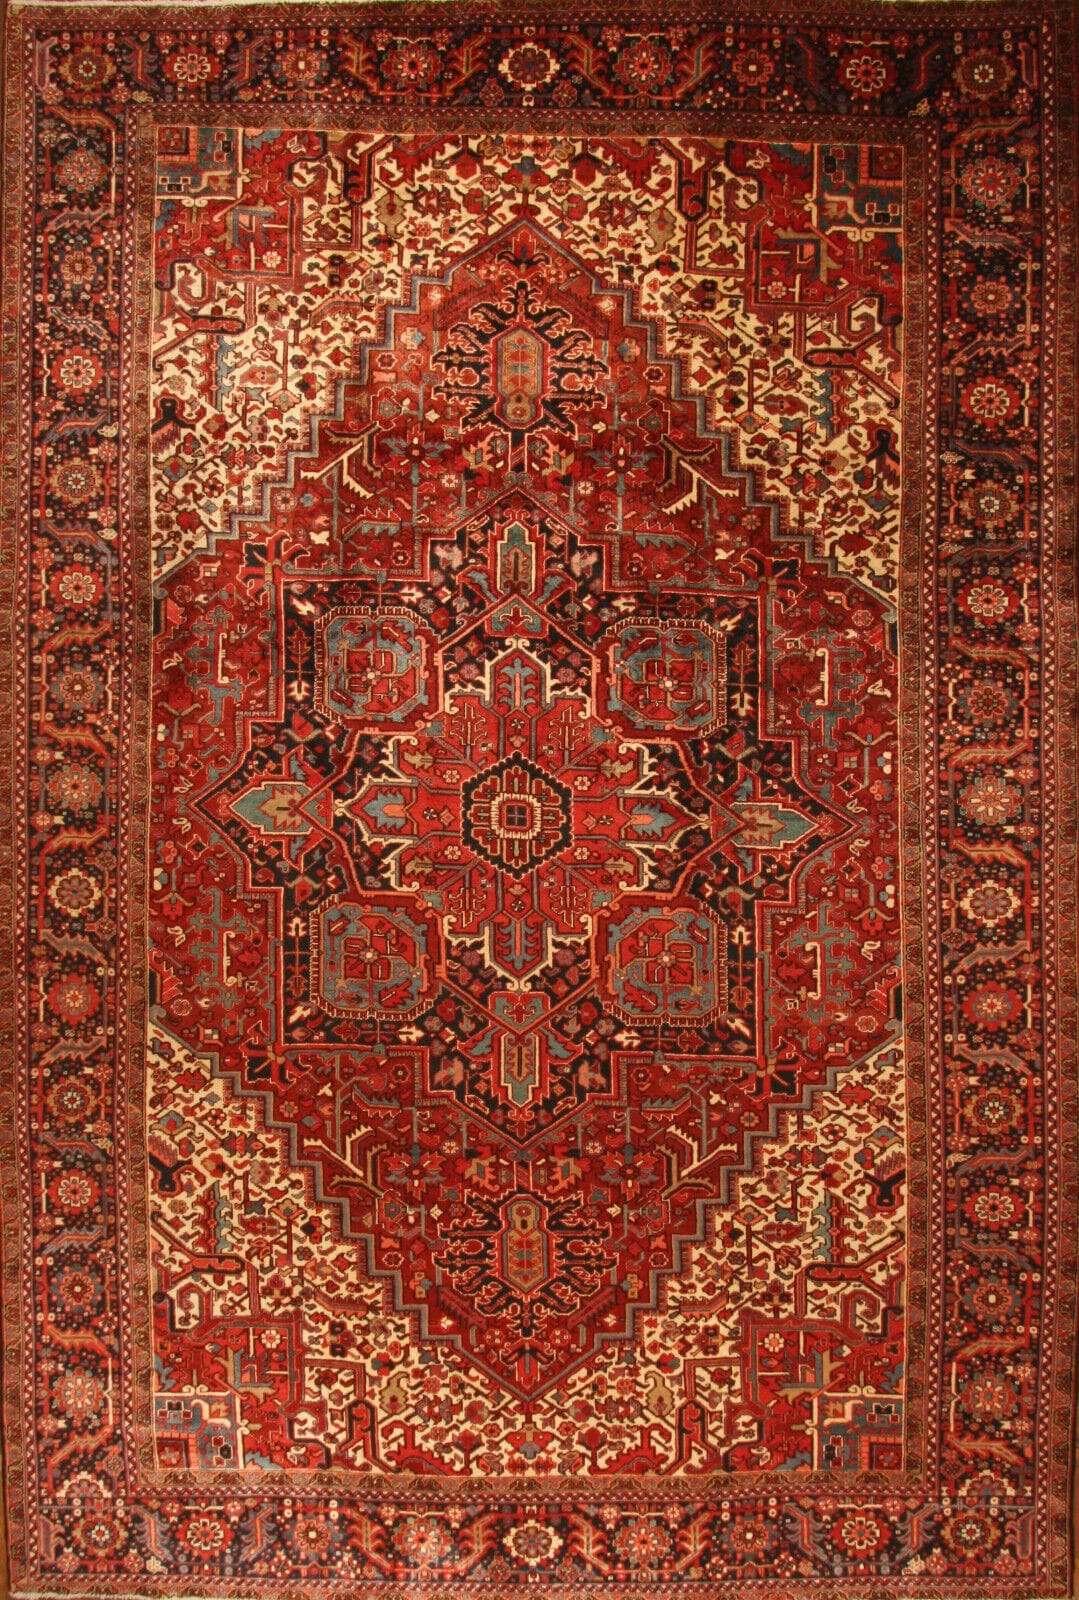 Handmade Vintage Persian Style Heriz Rug showcased in a classic living room setting